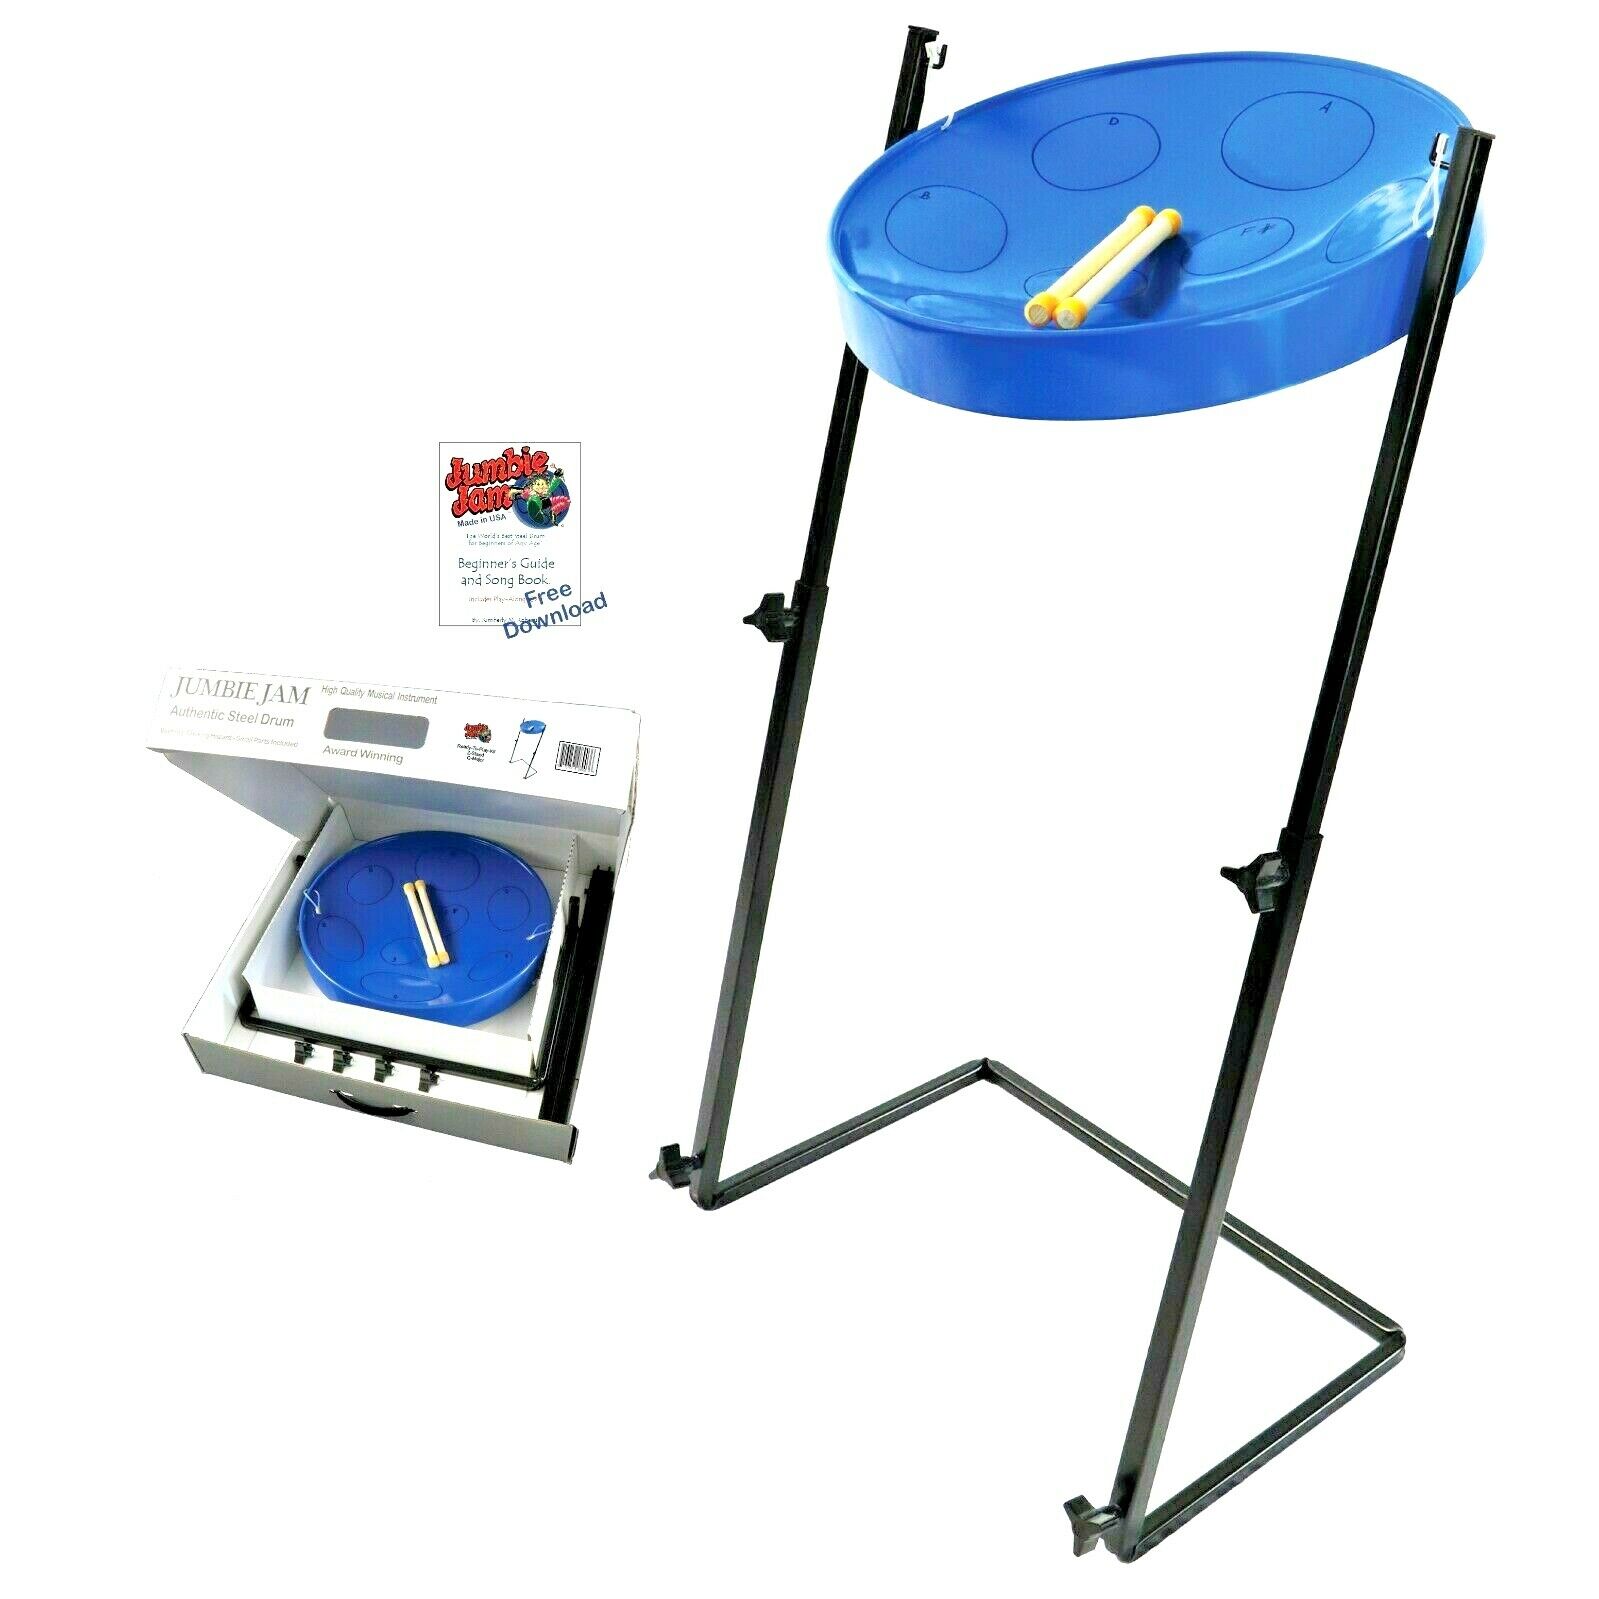 mini Steel Drum, from the world leader in PAN Jumbie ----WITH STEEL STAND!